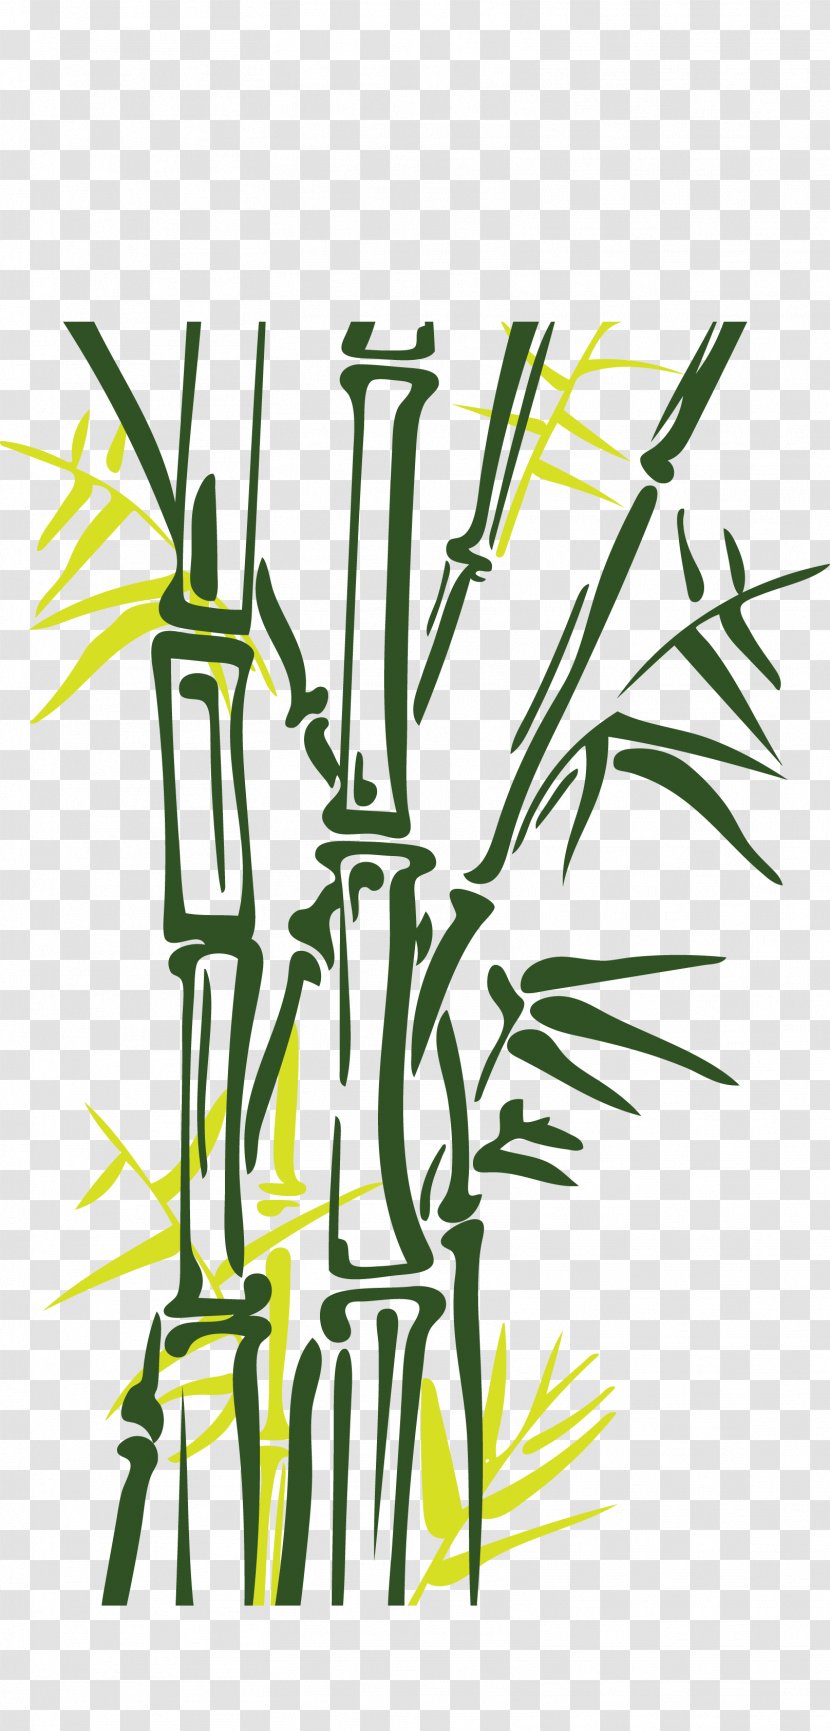 Bamboo Euclidean Vector Painting Illustration - Tree - Hand-painted Transparent PNG